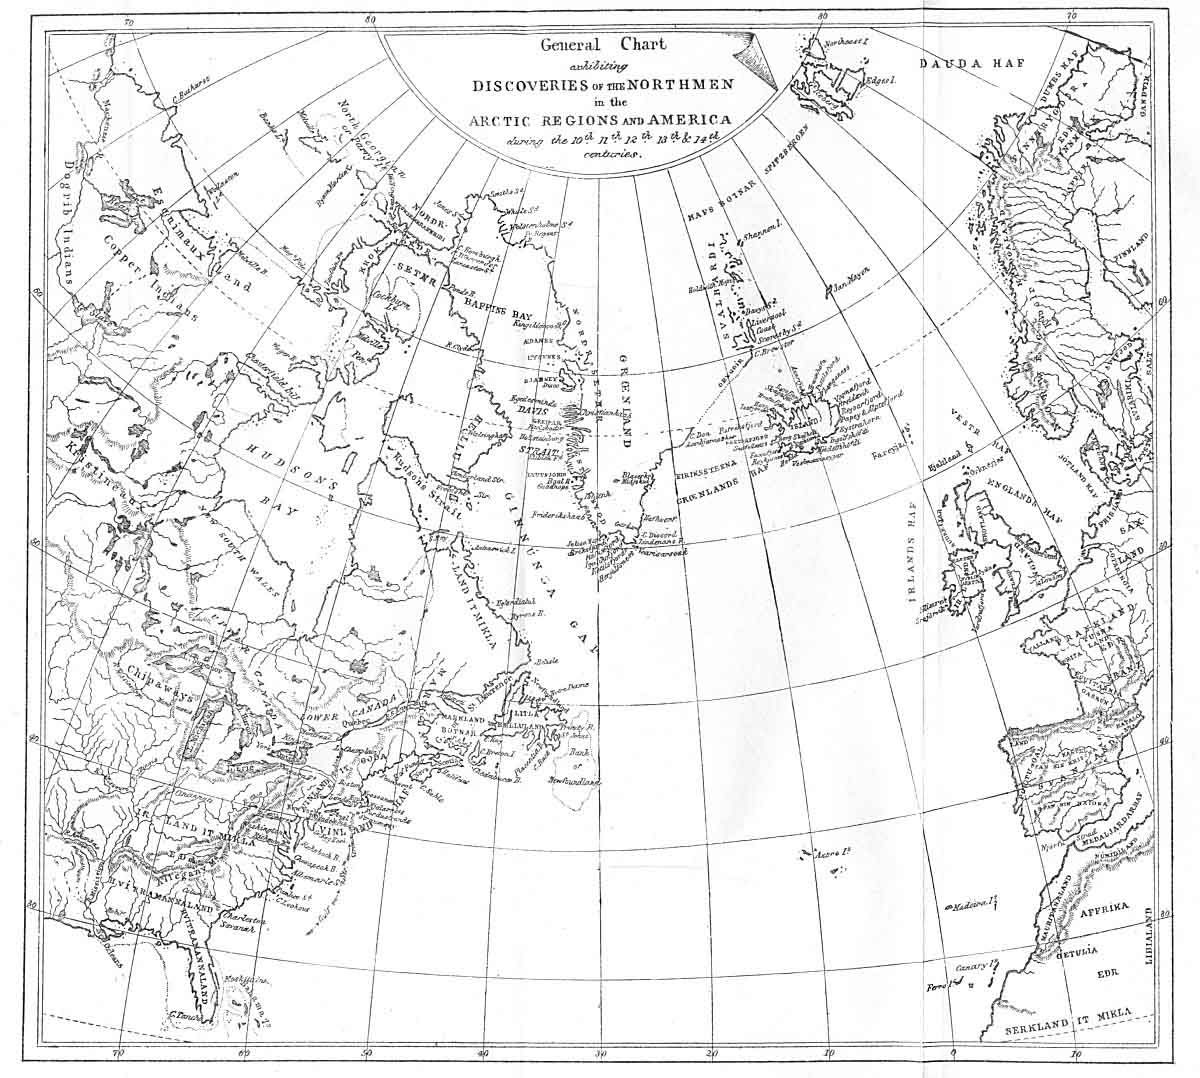 General Chart Exhibiting Discoveries of the Northmen in the Arctic Regions And America 